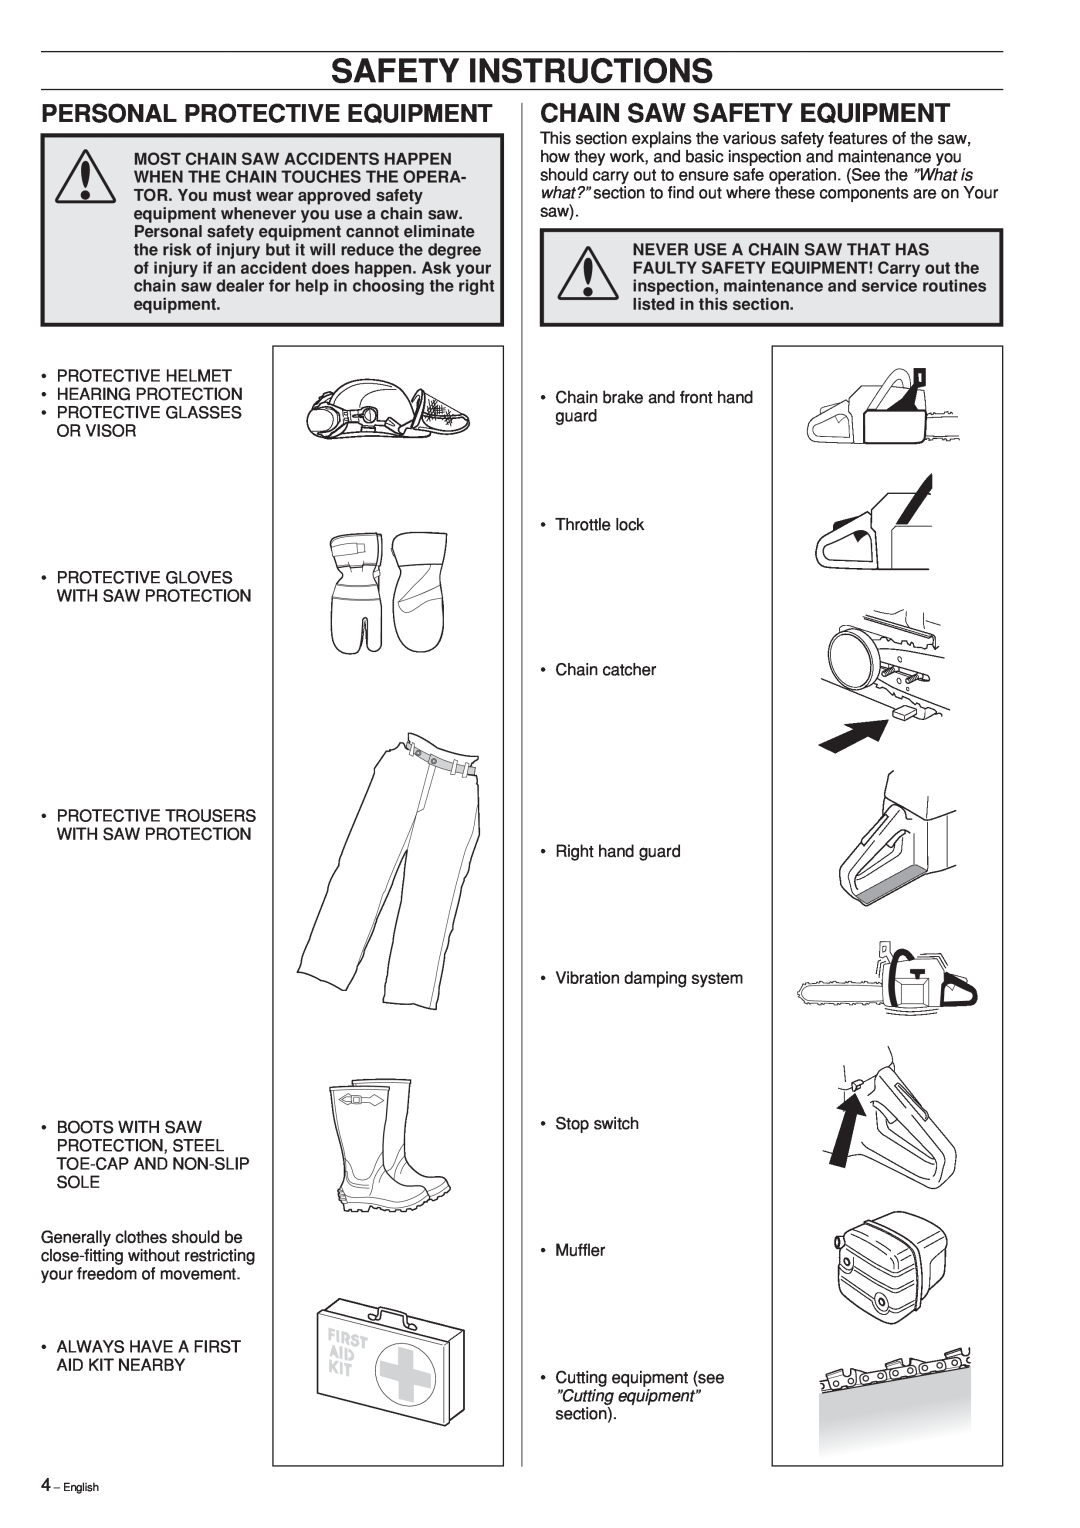 Jonsered CS 2152 manual Safety Instructions, Chain Saw Safety Equipment, Personal Protective Equipment 